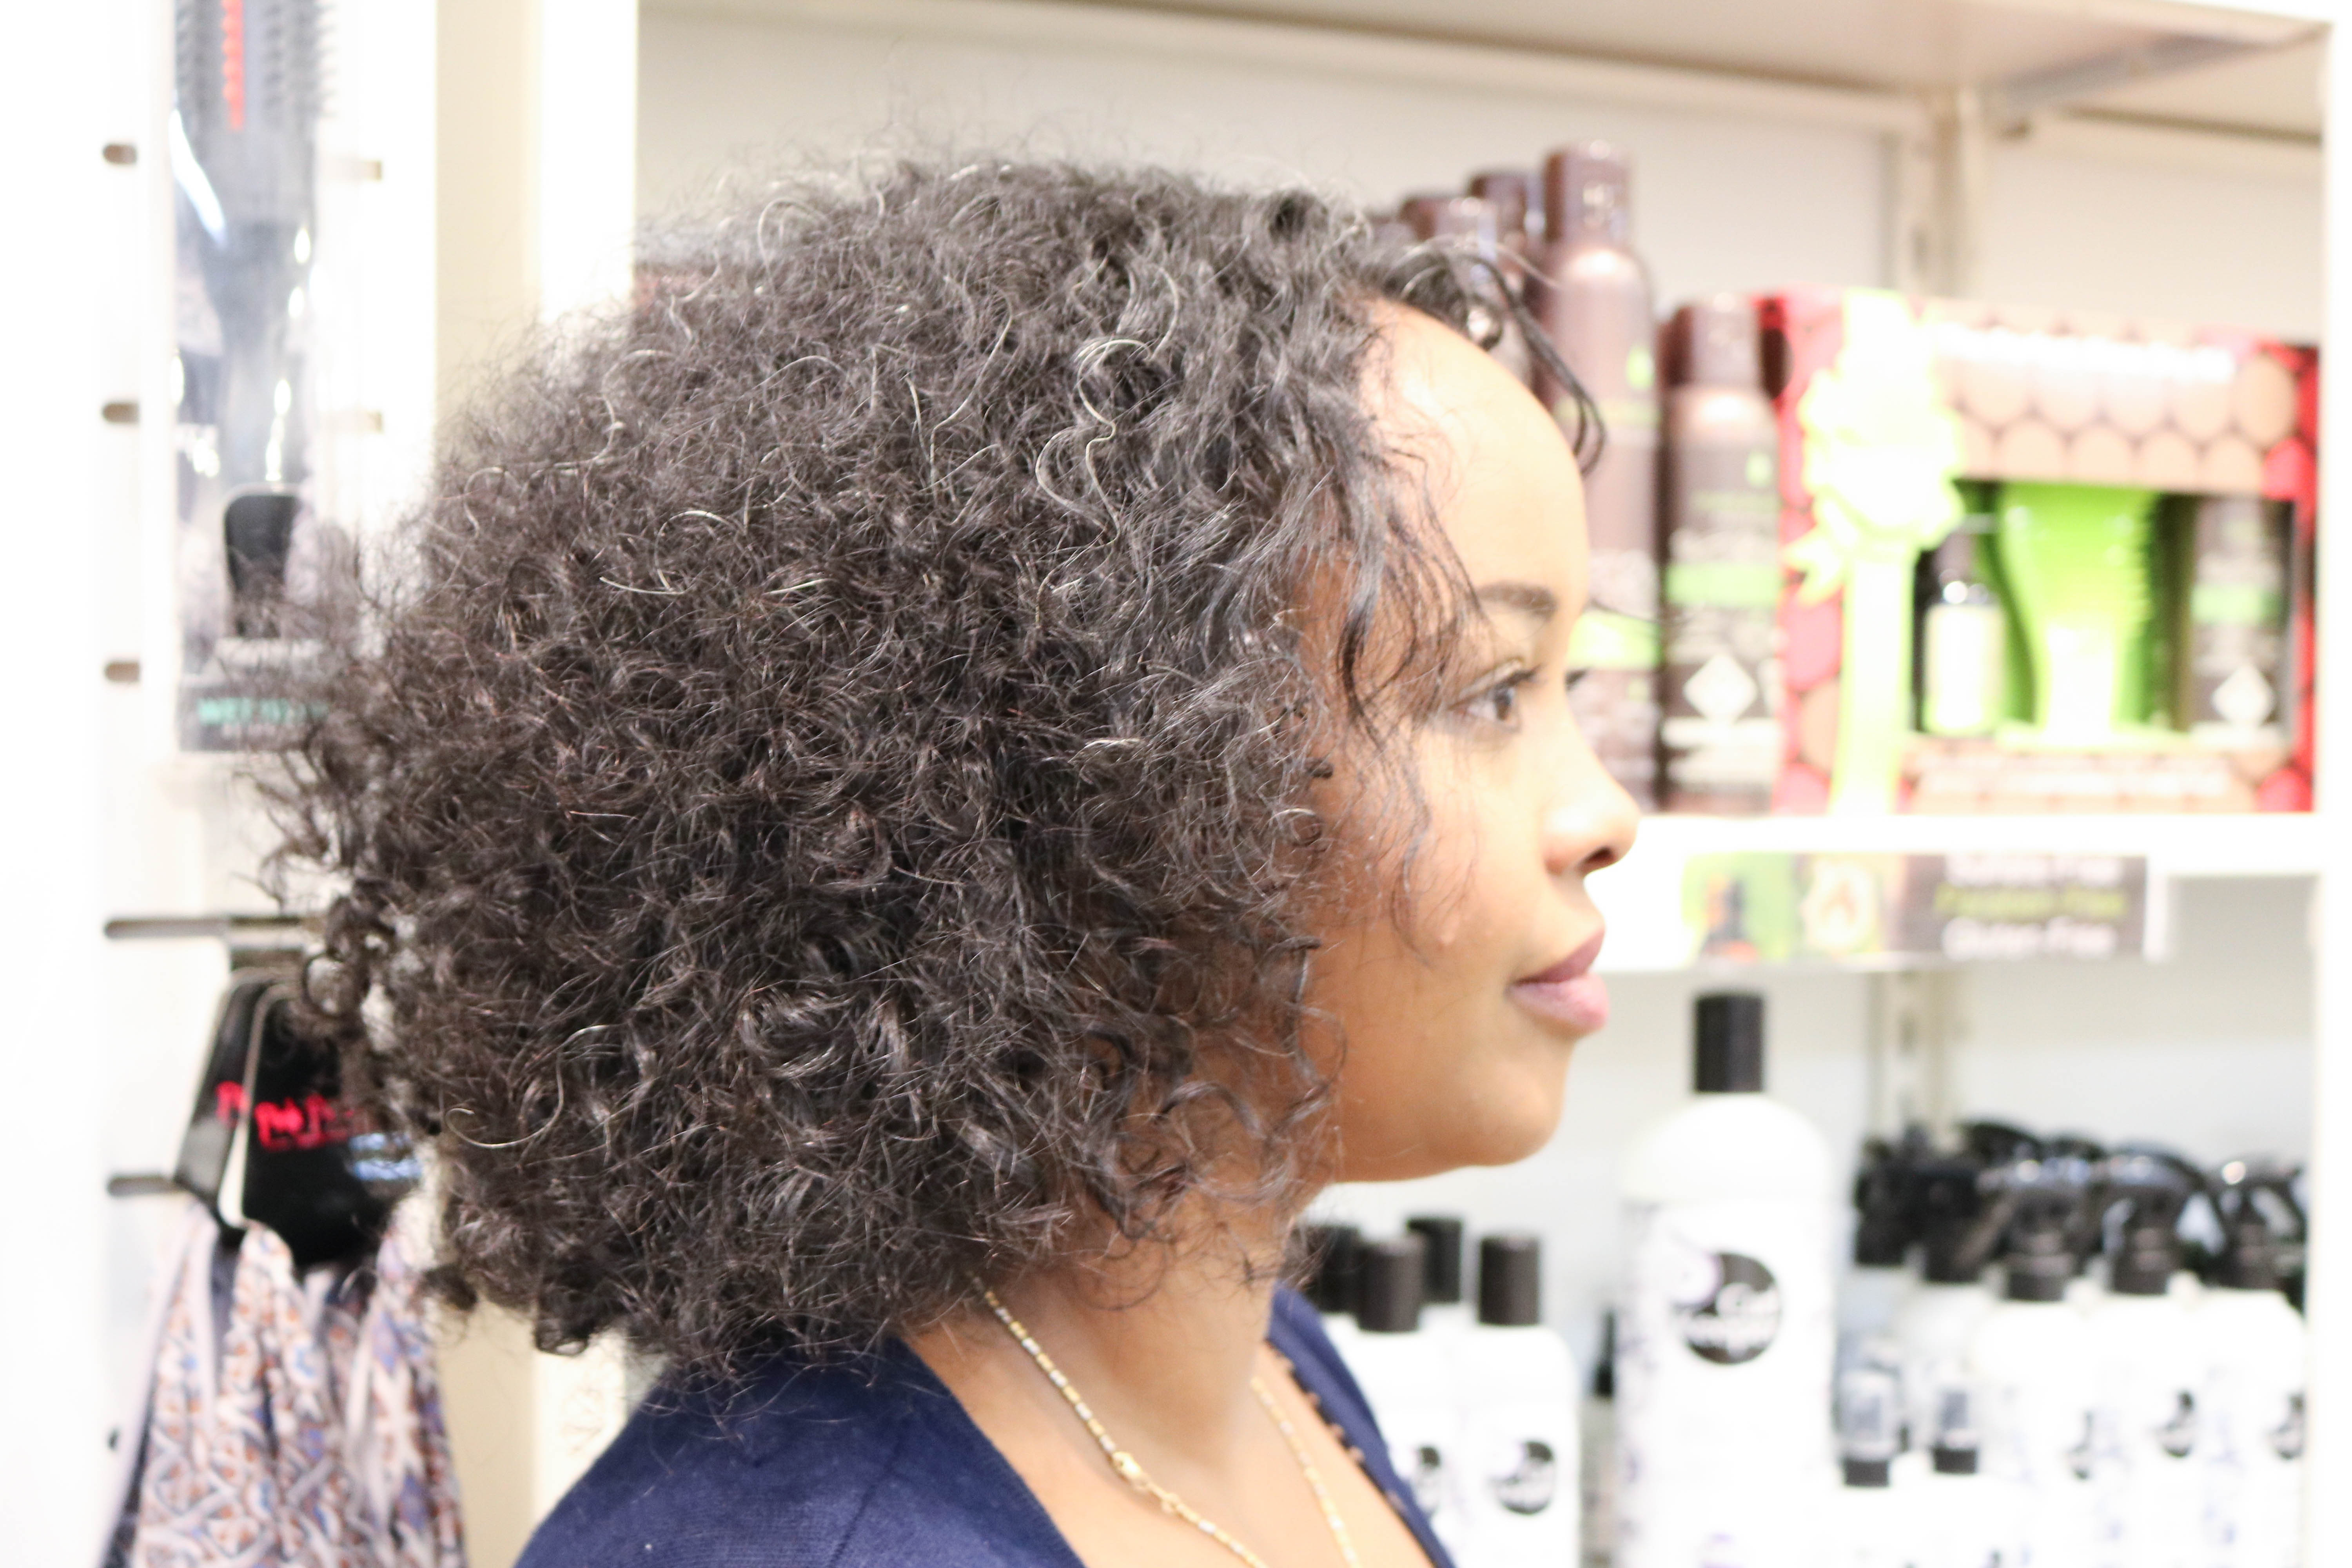 How To Achieve Perfect Curls - Curl Keeper Review | www.styledomination.com